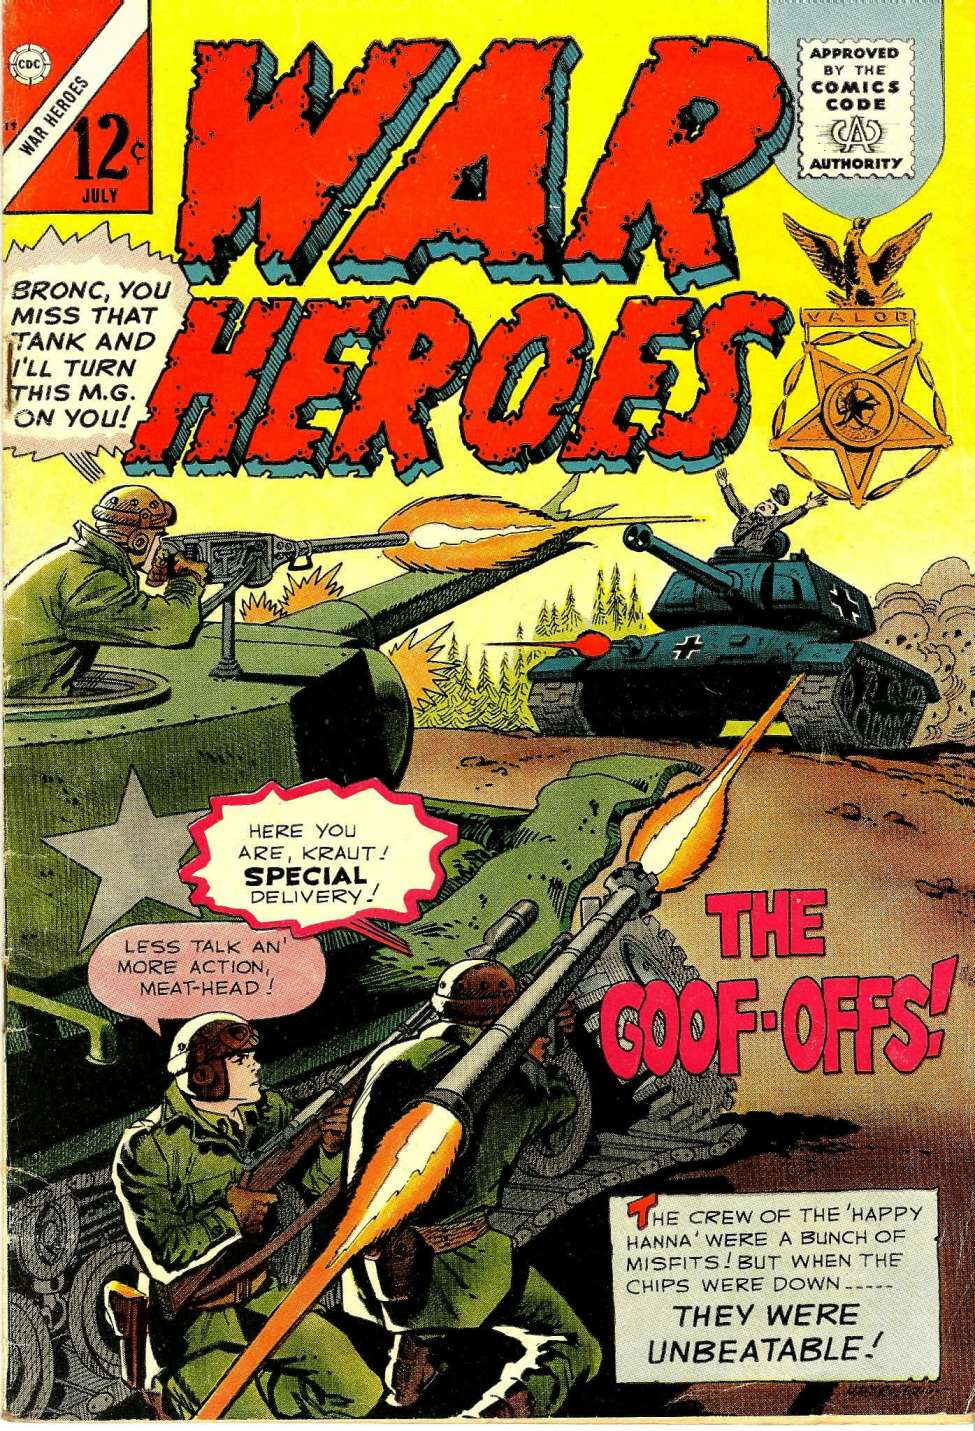 Comic Book Cover For War Heroes 19